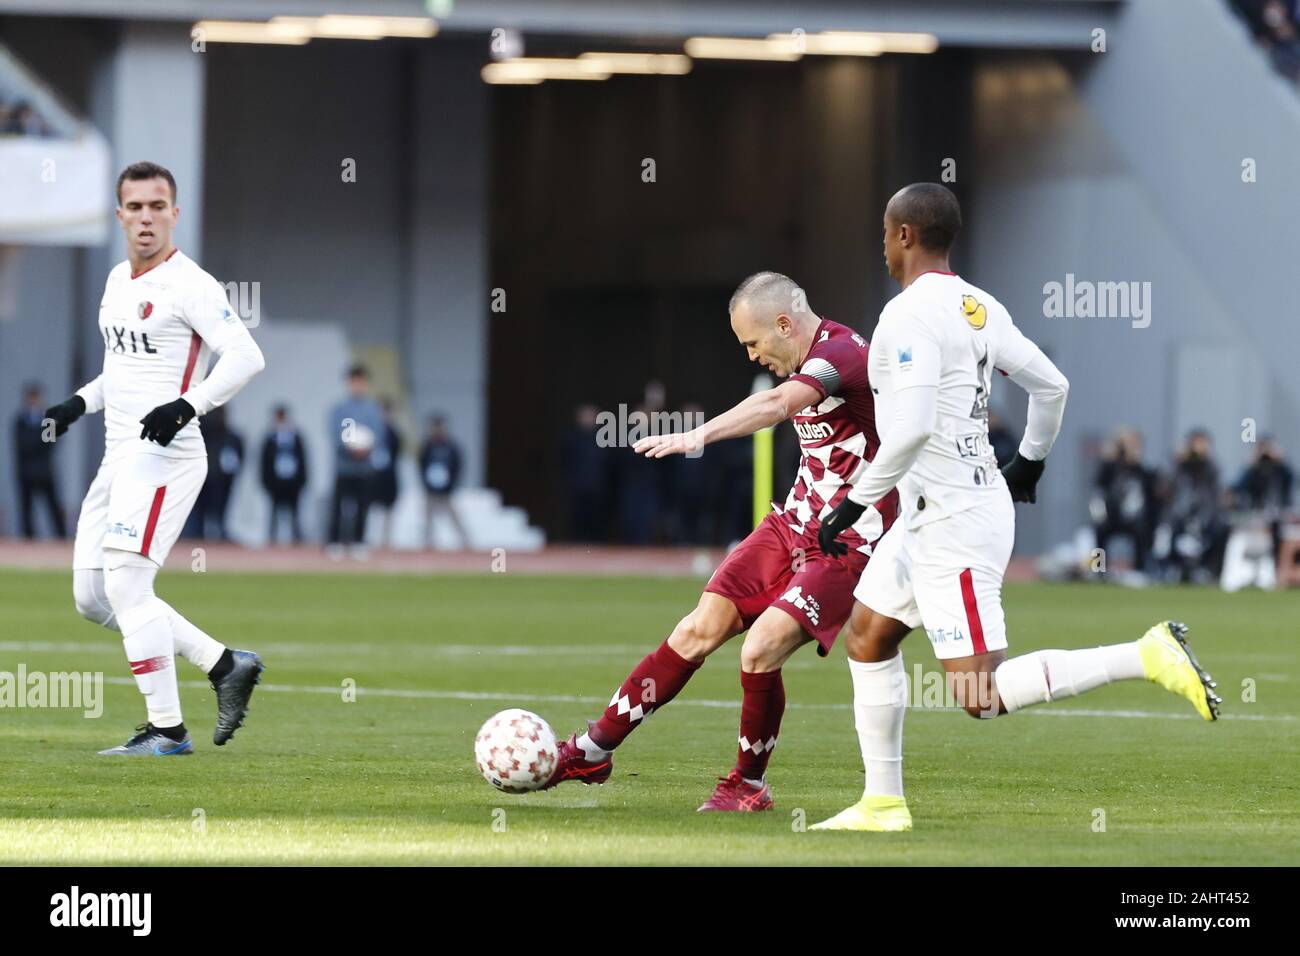 Tokyo, Japan. 1st Jan, 2020. Vissel Kobe's Andres Iniesta (Cap.) in action against Kashima Antlers' Leo Silva (4) during the Emperor's Cup JFA 99th Japan Football Championship final match at the new National Stadium. Vissel Kobe defeats Kashima Antlers 2-0. 57,597 people attended the first sports match held at the new National Stadium, which will be a venue for the Tokyo 2020 Olympic and Paralympic Games. Credit: Rodrigo Reyes Marin/ZUMA Wire/Alamy Live News Stock Photo